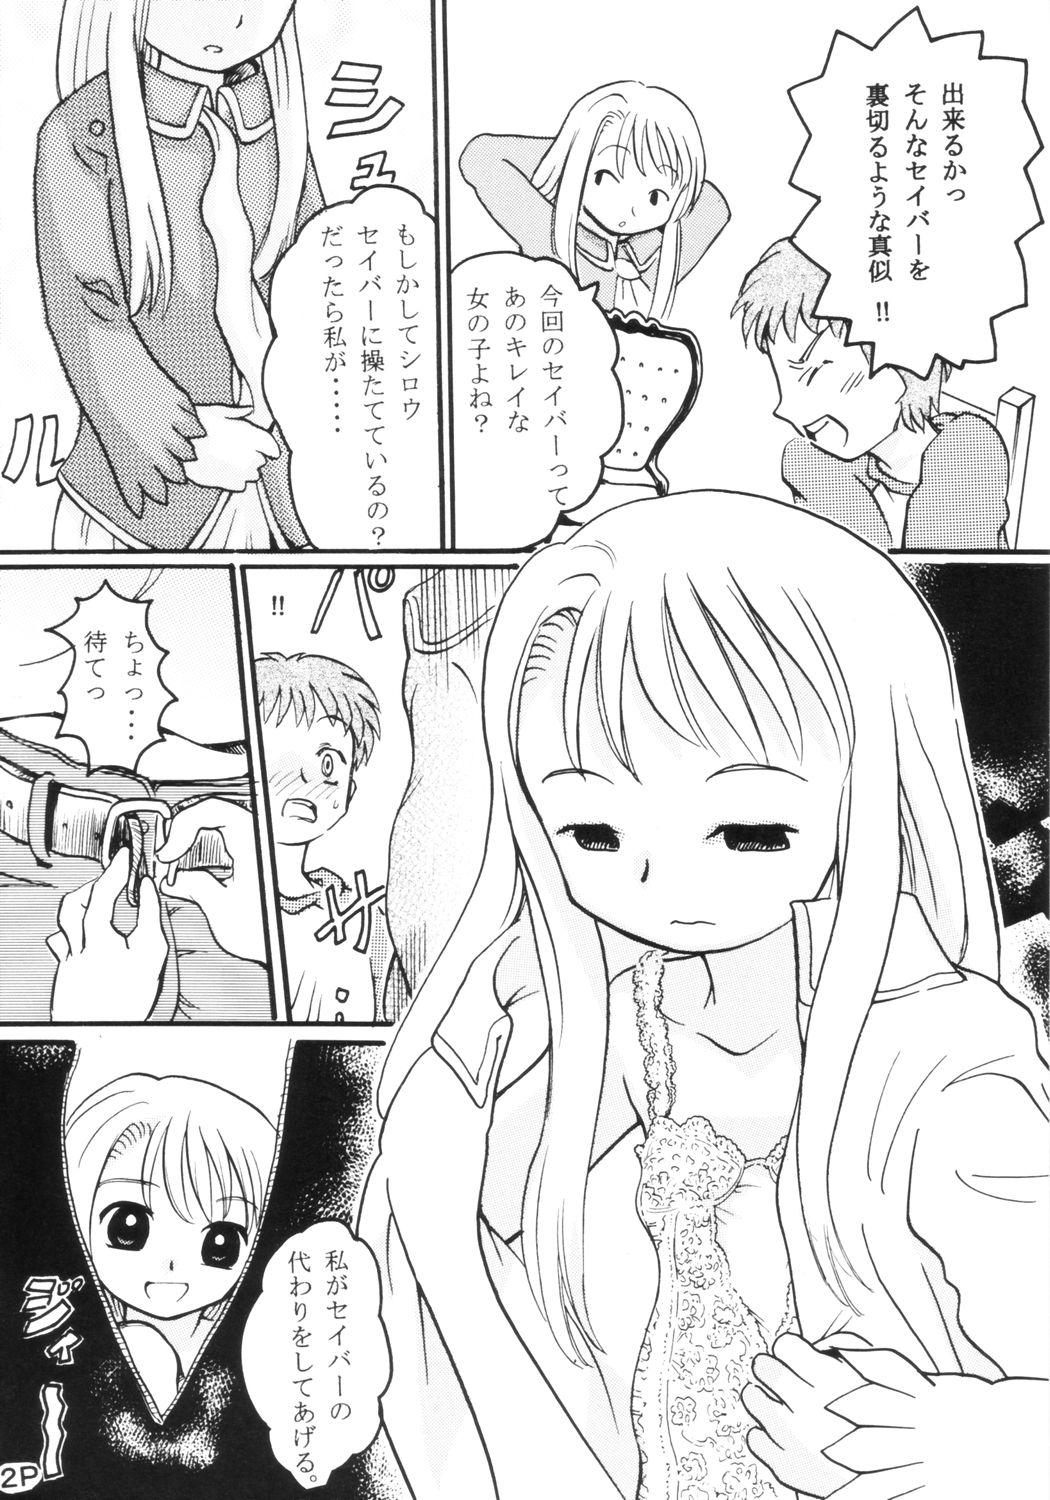 Banho Fate Stay Night Fan Book Vol. 1 - Fate stay night Gets - Page 3